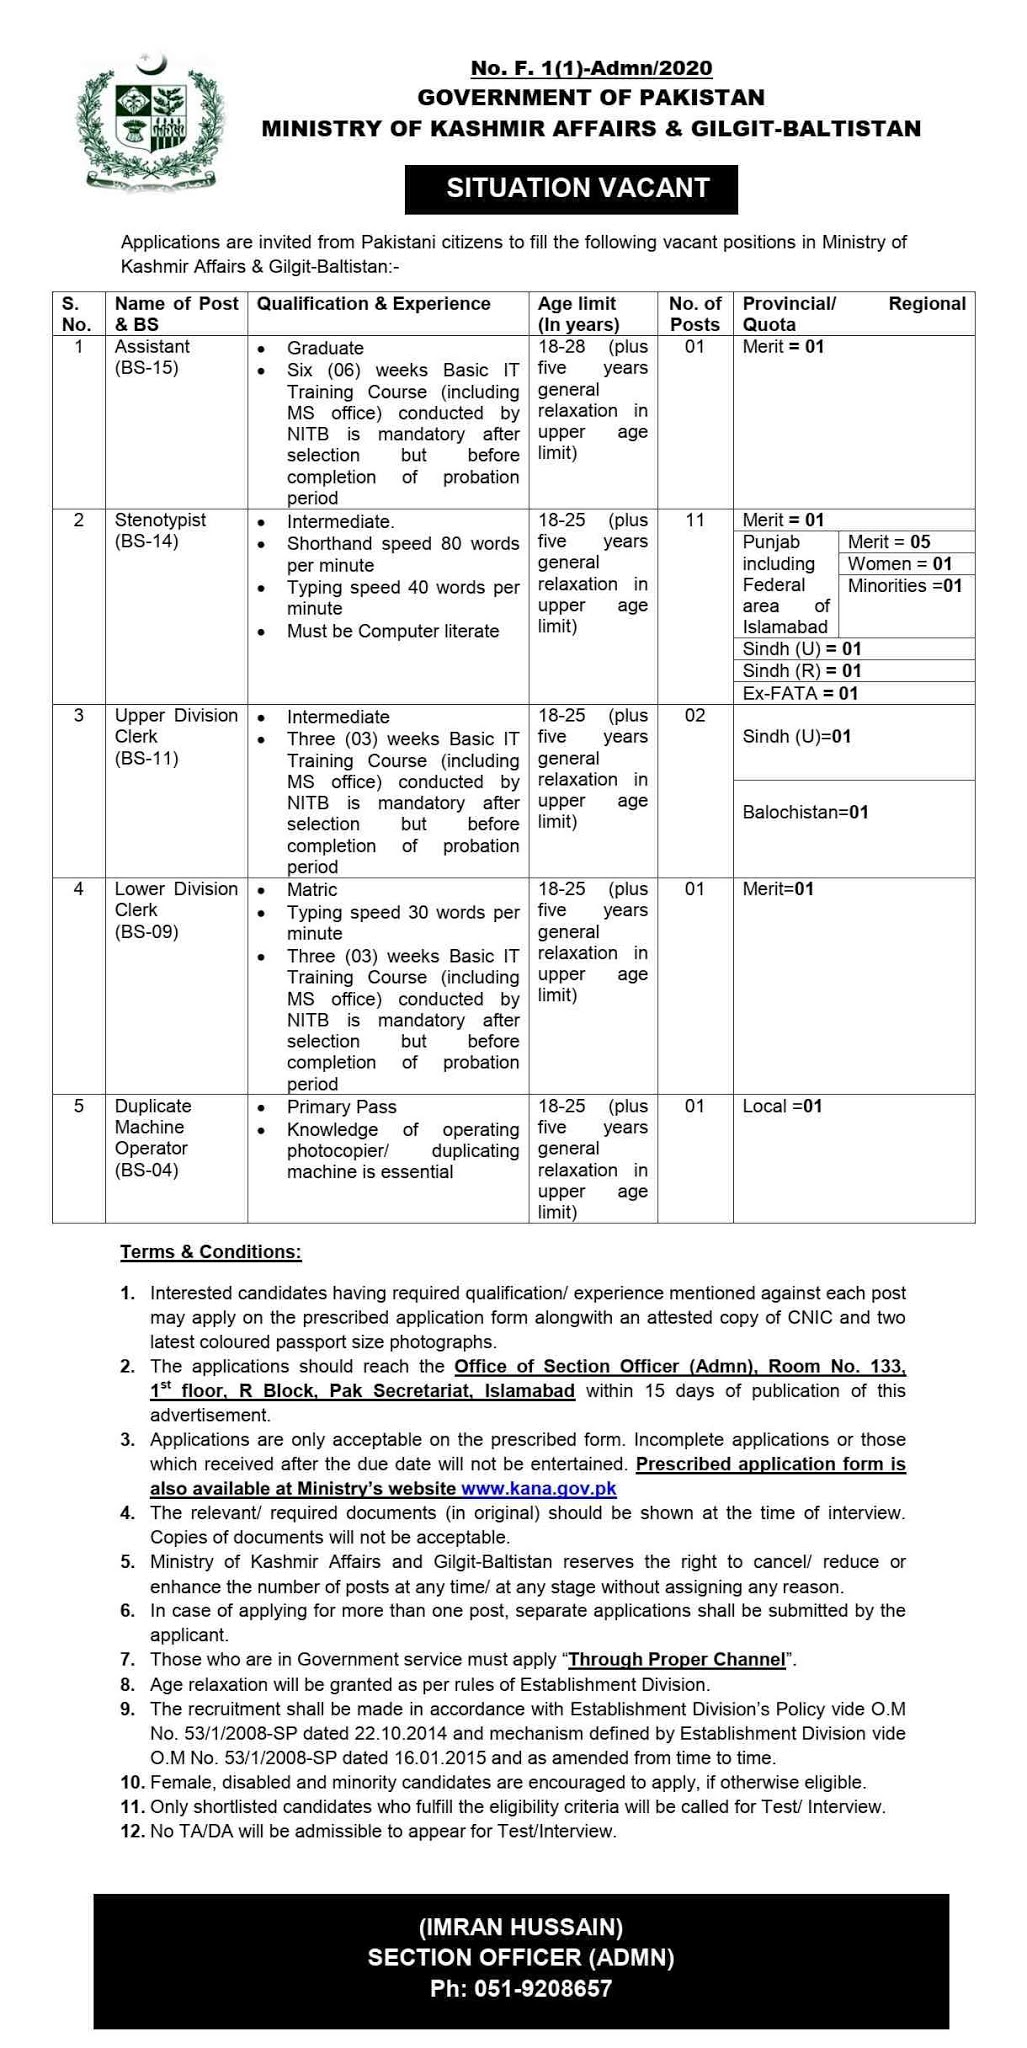 Government of Pakistan Jobs 2020 for Assistant, Stenotypist, UDC, LDC & more